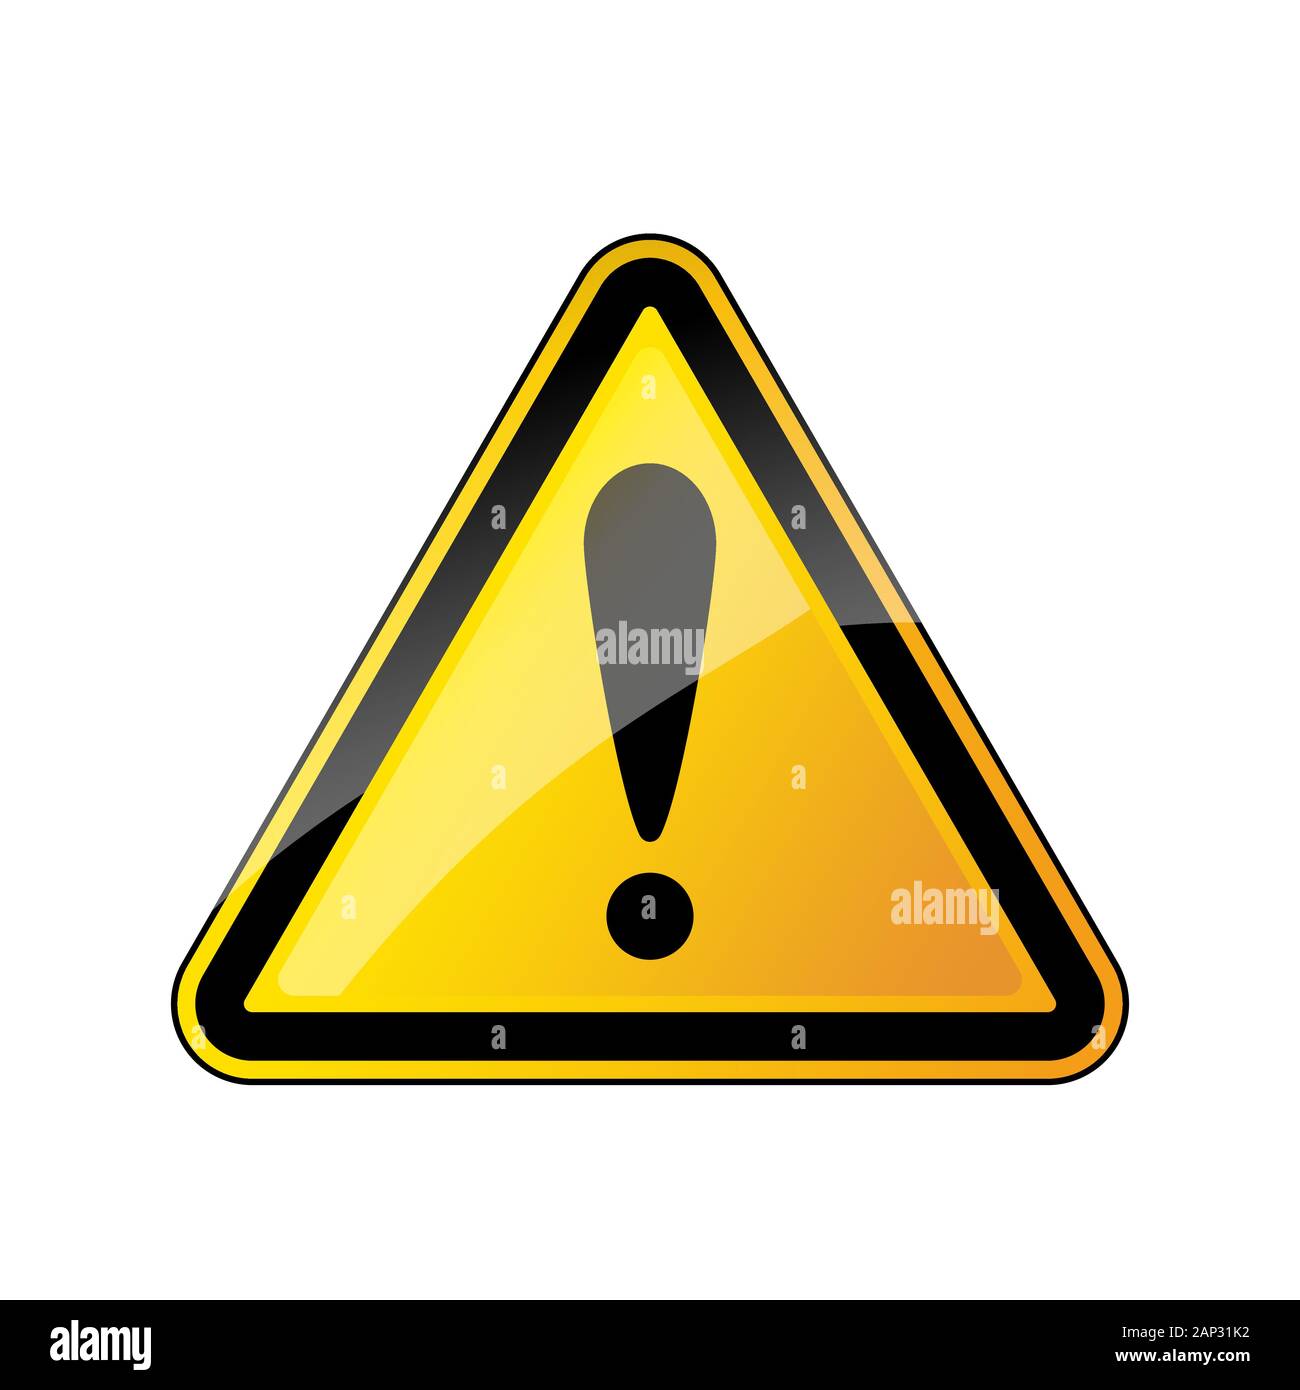 Warning danger sign. Vector illustration. Warning triangle sign with ...